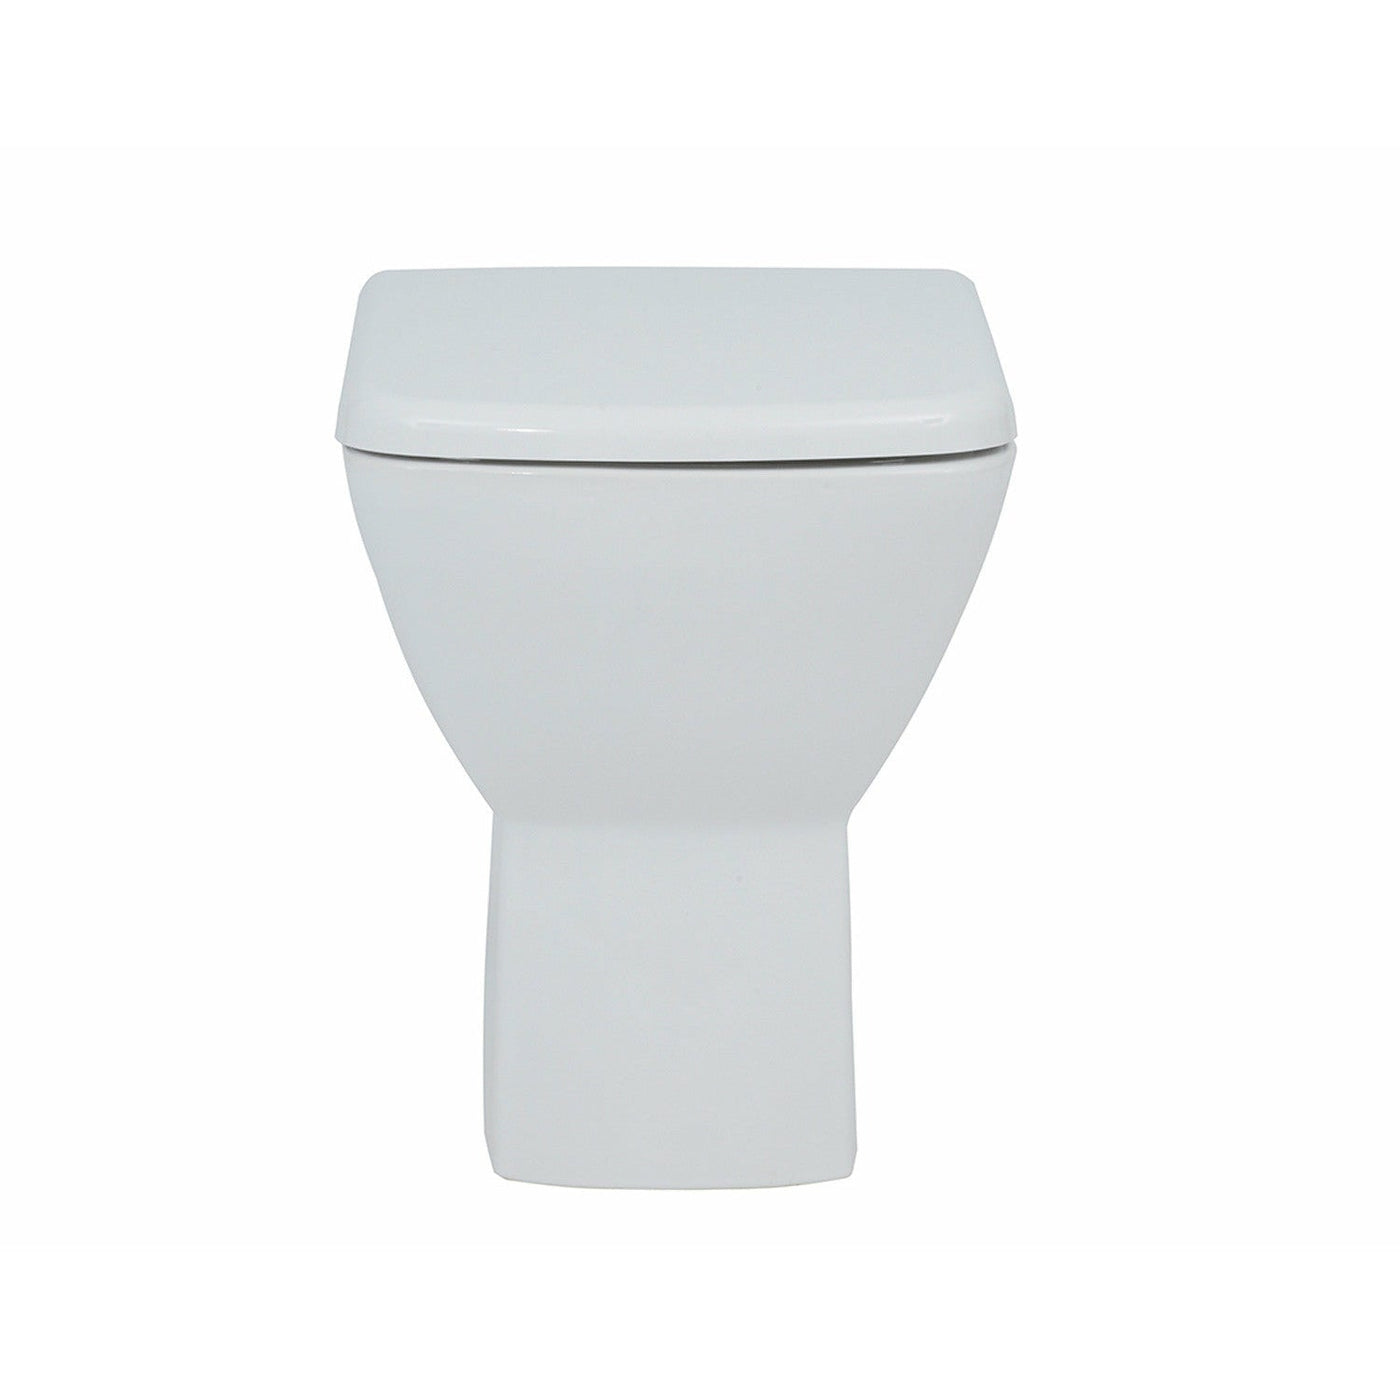 Frontline Summit Back-to-Wall Toilet with Soft-Close Seat - Letta London - 